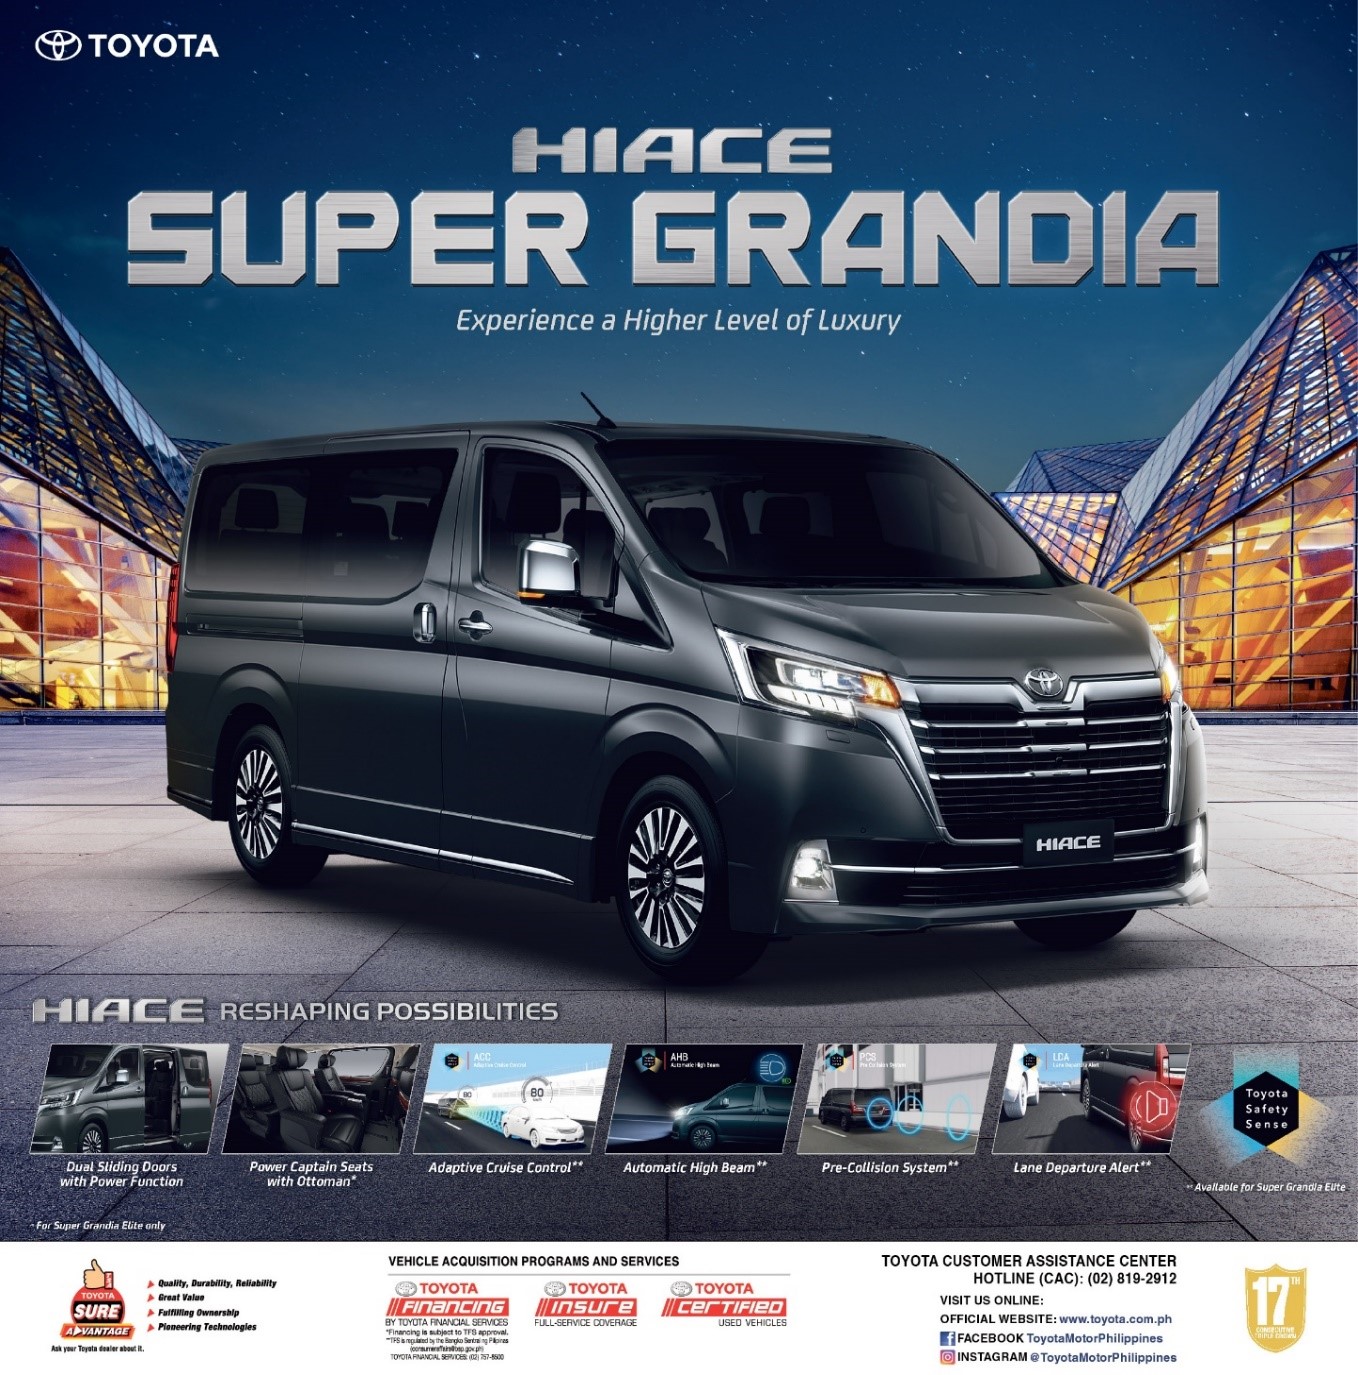 Experience Higher Level Of Luxury With The Hiace Super Grandia